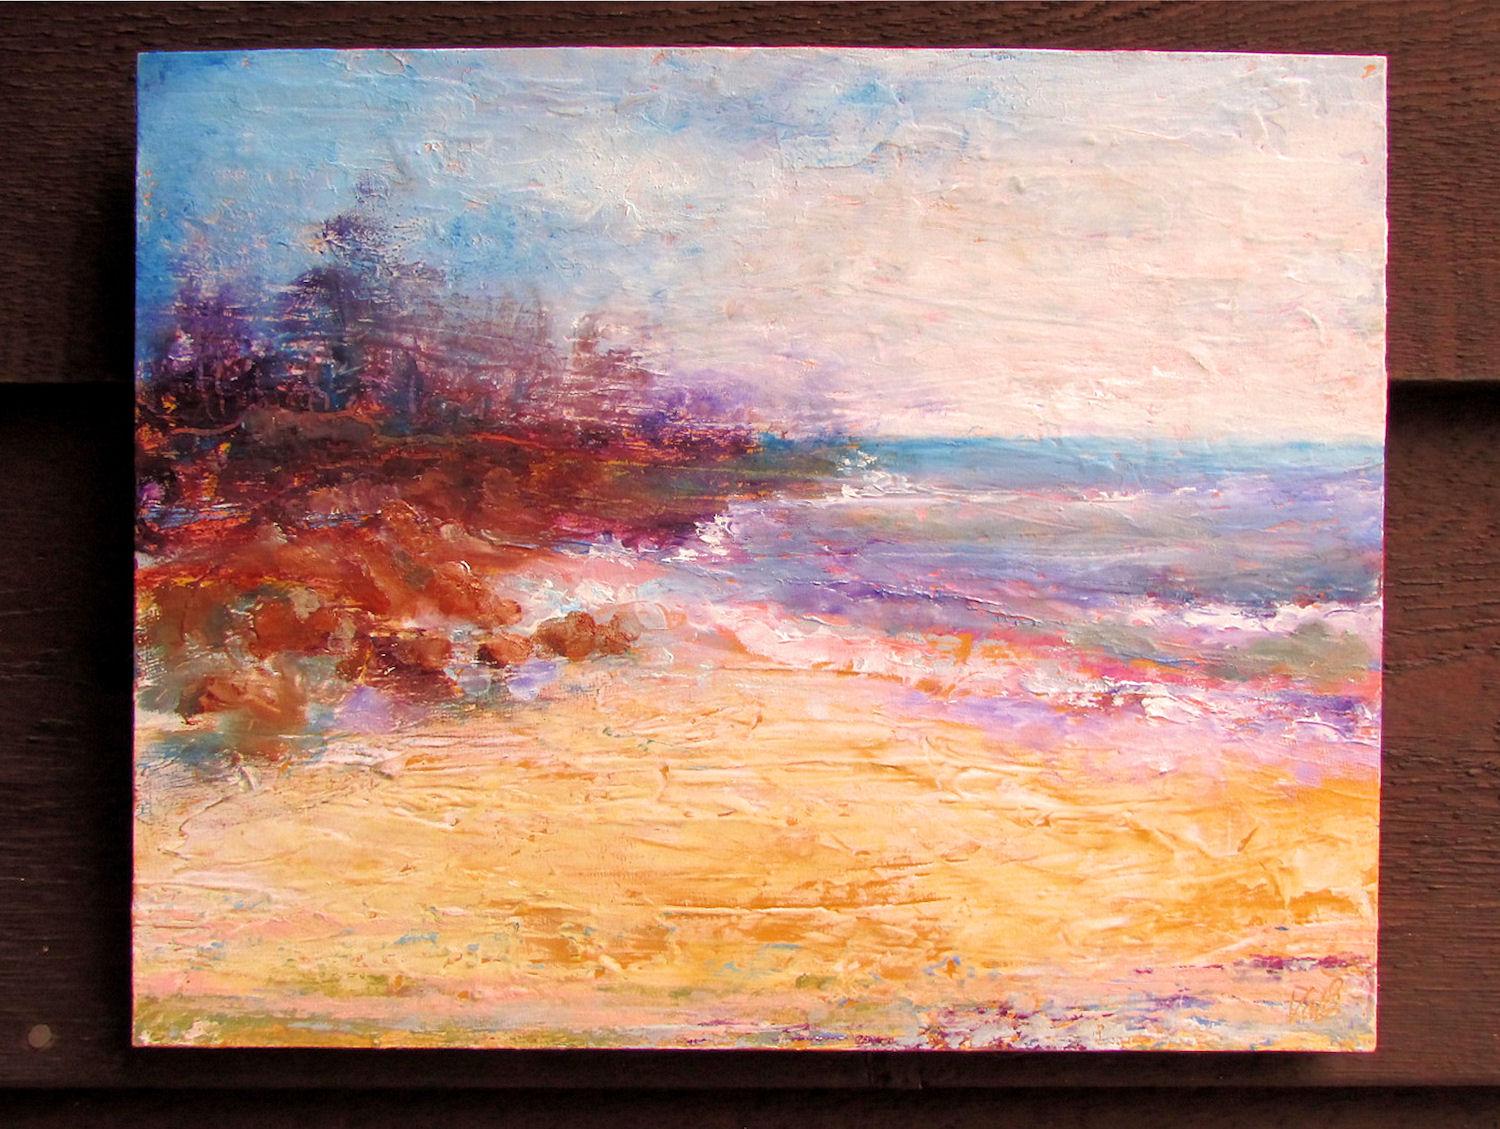 <p>Artist Comments<br>Artist Valerie Berkely presents a dreamy summer seascape. The warm color palette and gentle movements stir sun-soaked memories and carefree beach vacations. With her finger painting technique, Valerie applies a special